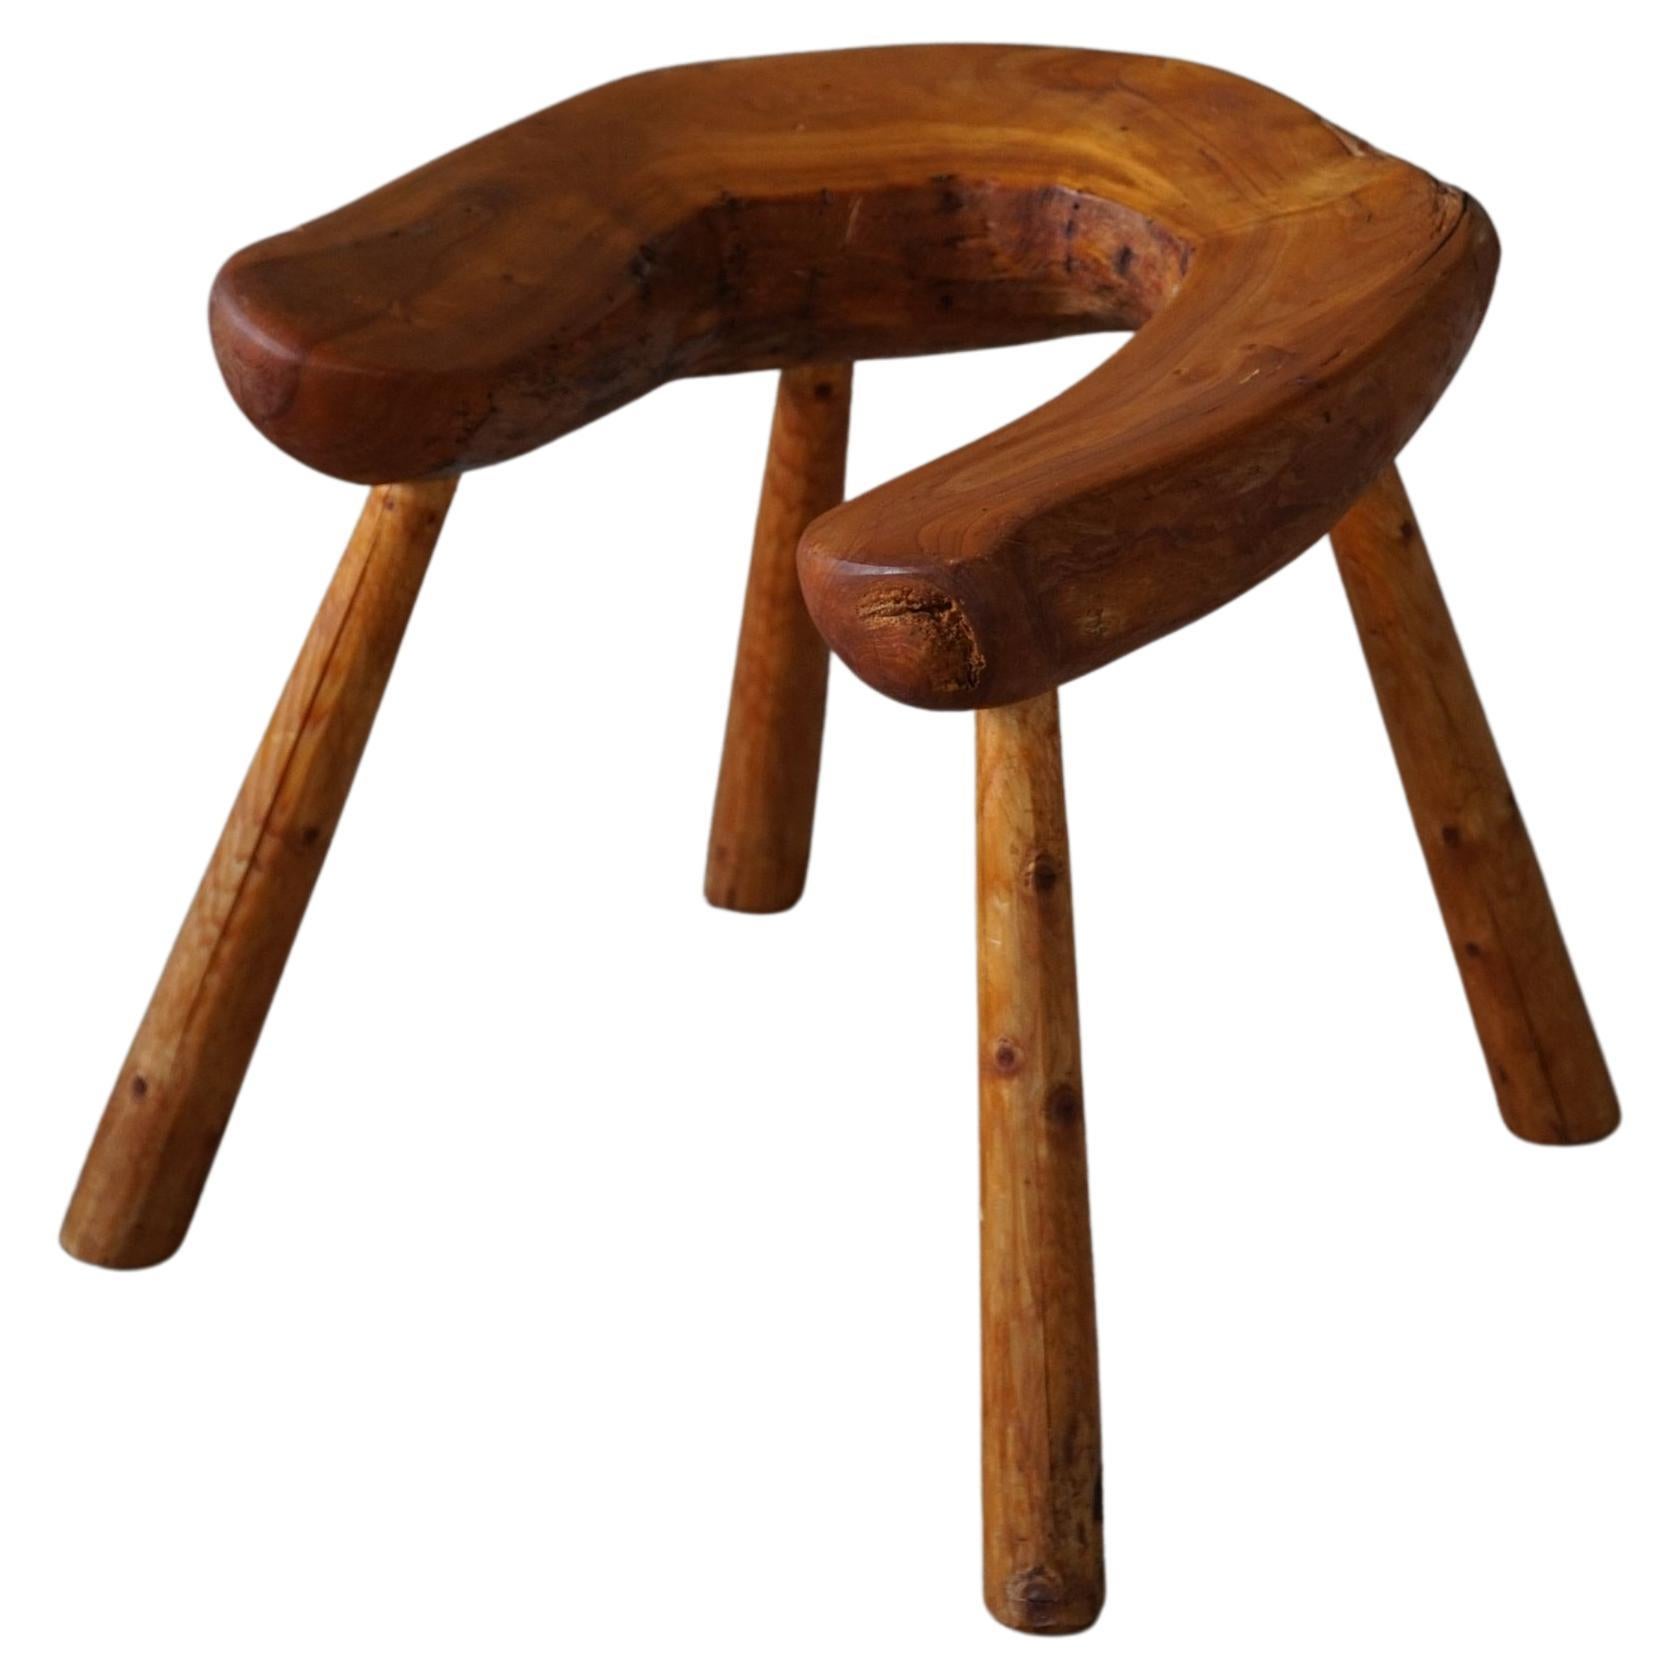 Wabi Sabi Stool in Solid Pine, Handcrafted by a Swedish Cabinetmaker, 1950s For Sale